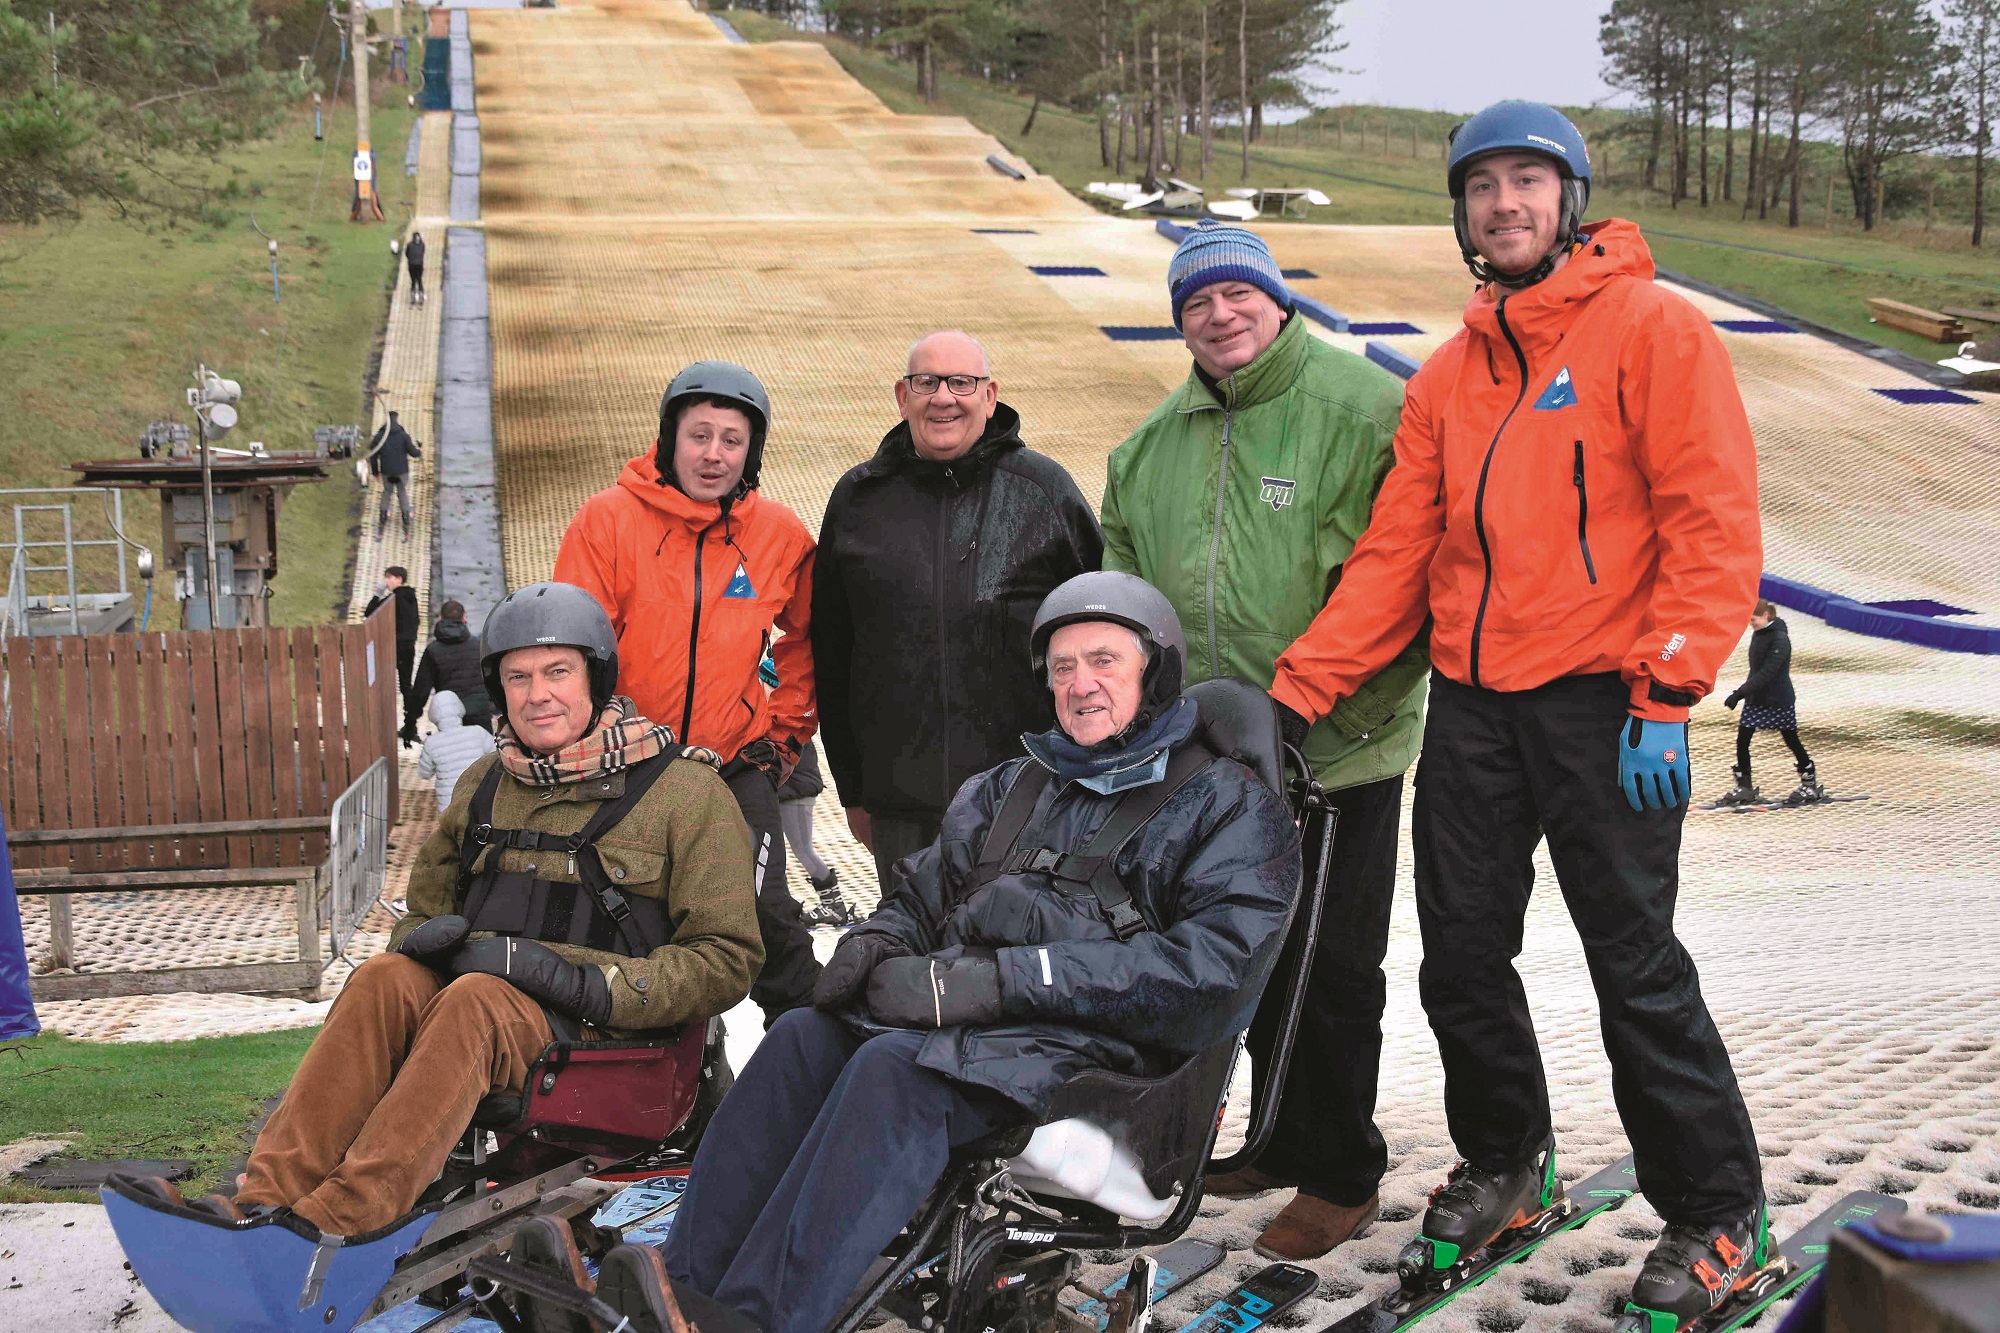 West Wales Freemasons at the Pembry Ski4All track after donating £8500